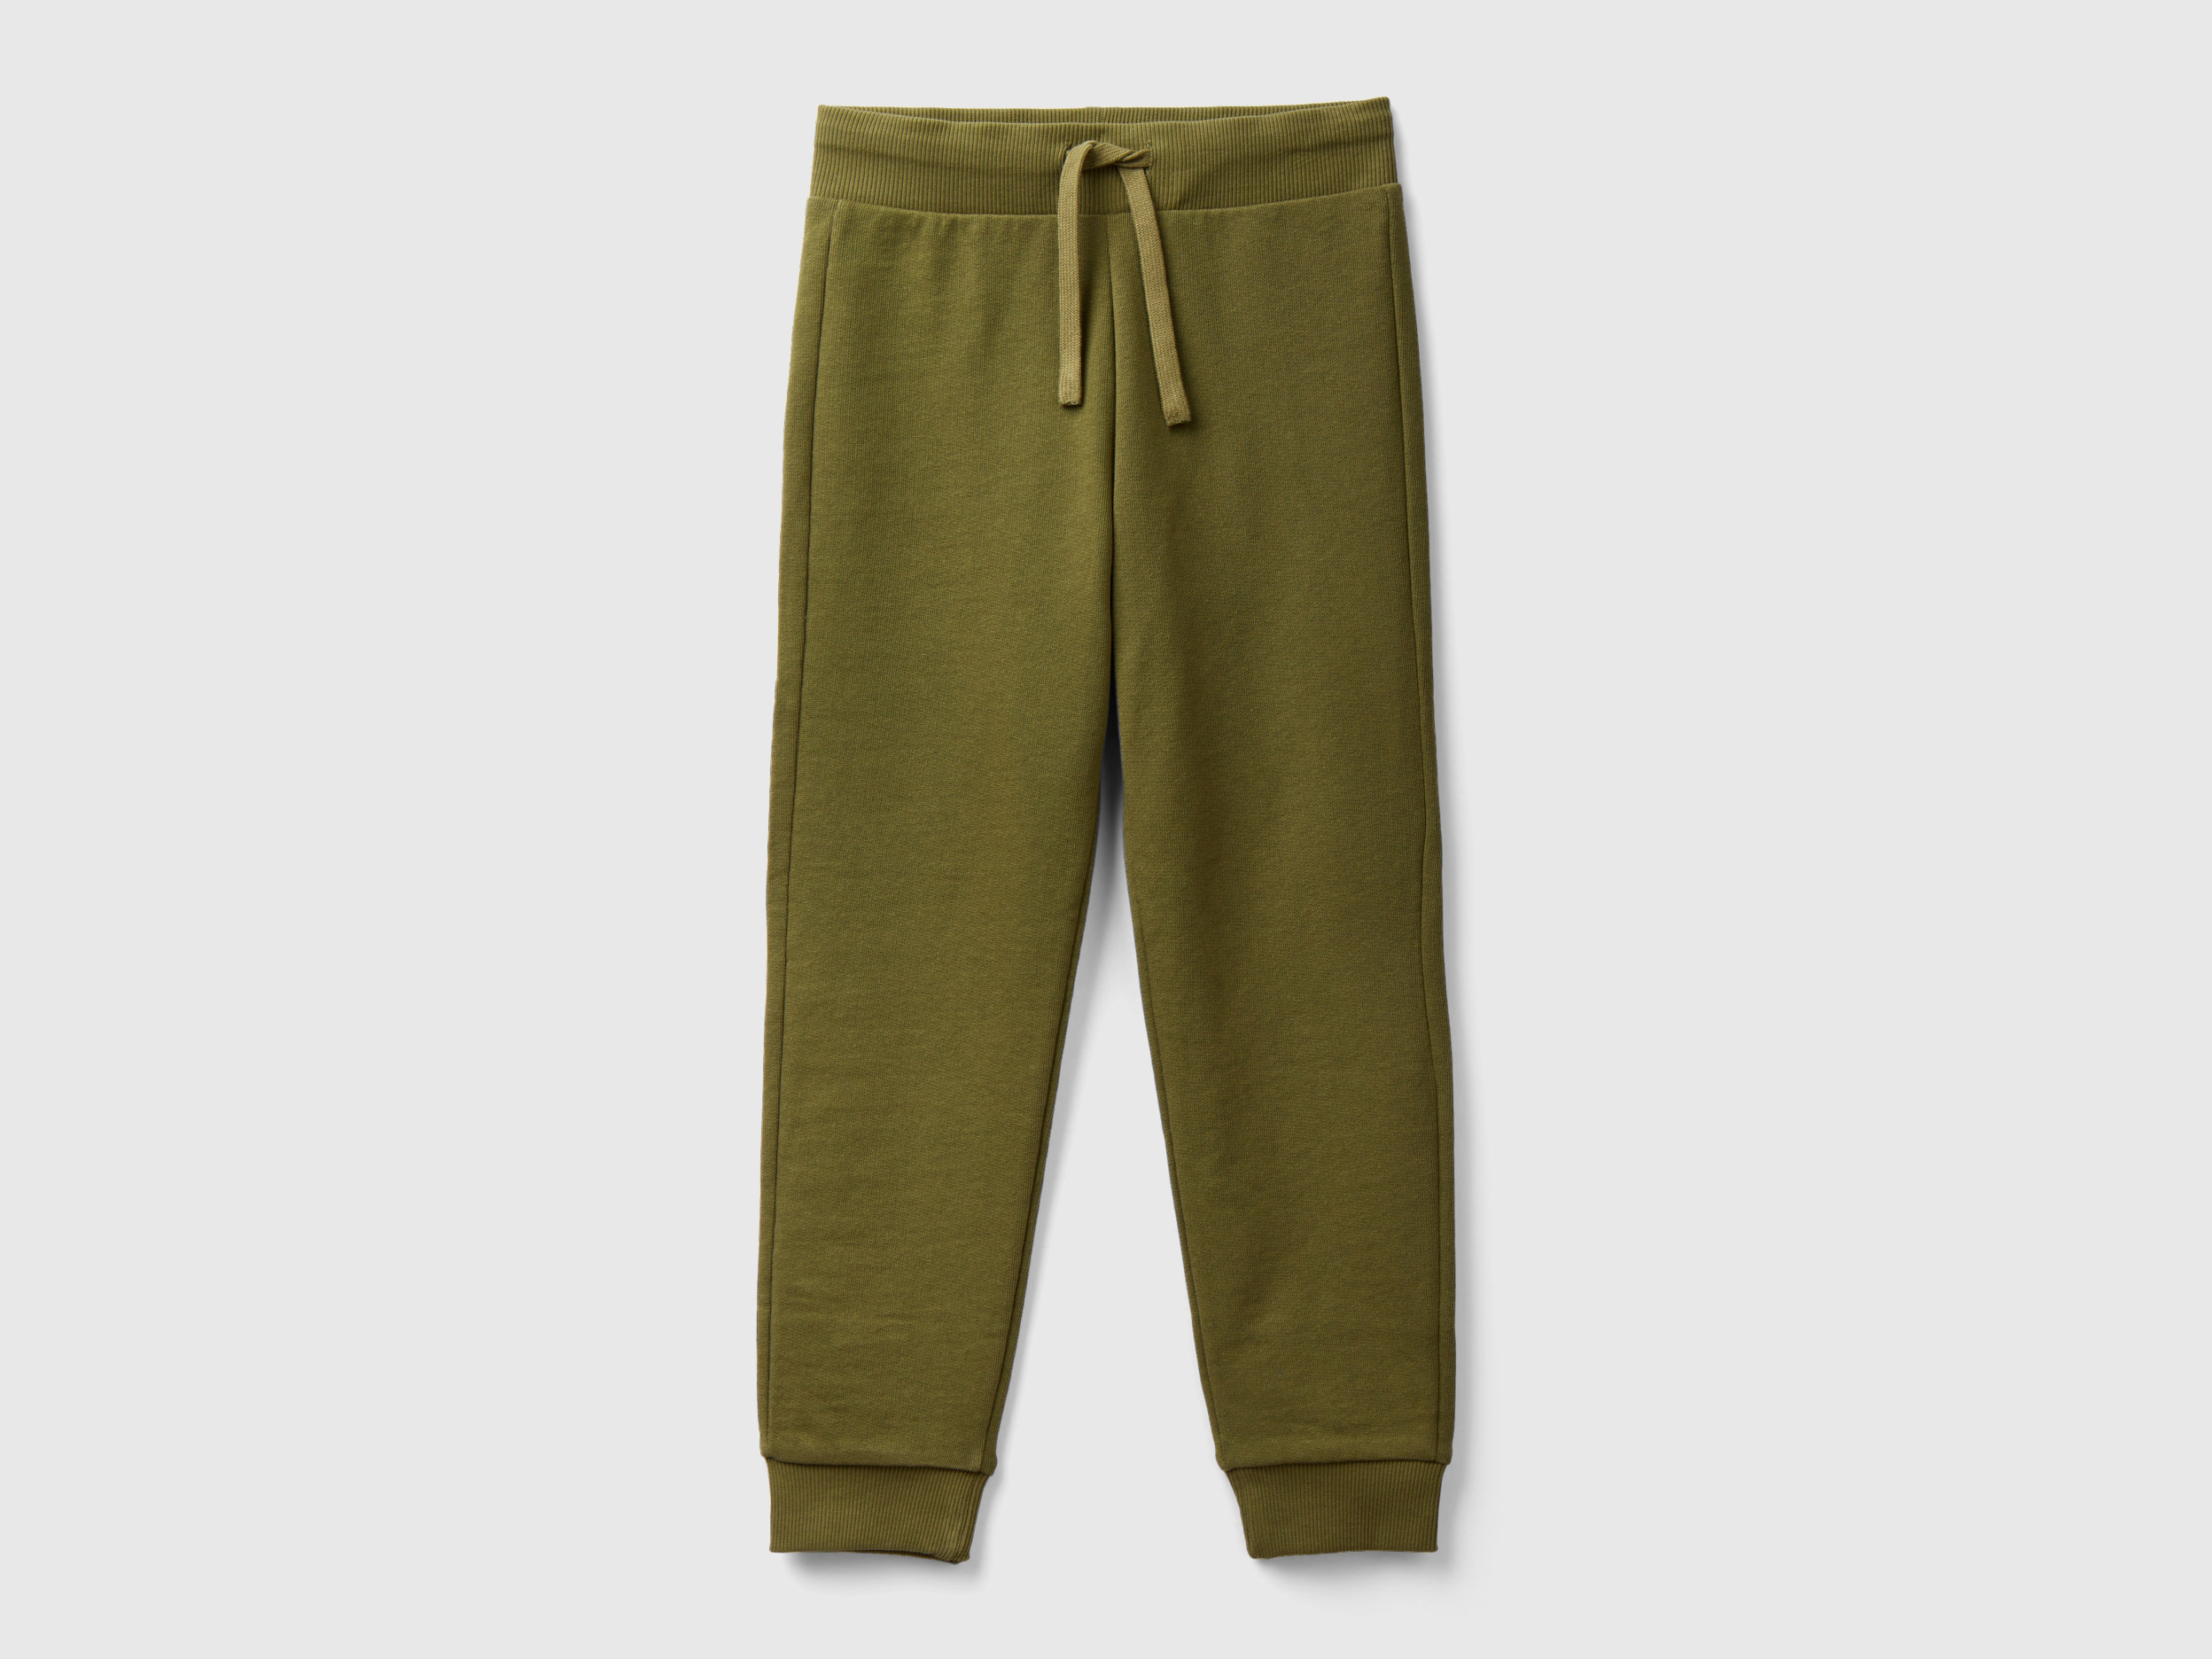 Benetton, Sporty Trousers With Drawstring, size XL, Military Green, Kids